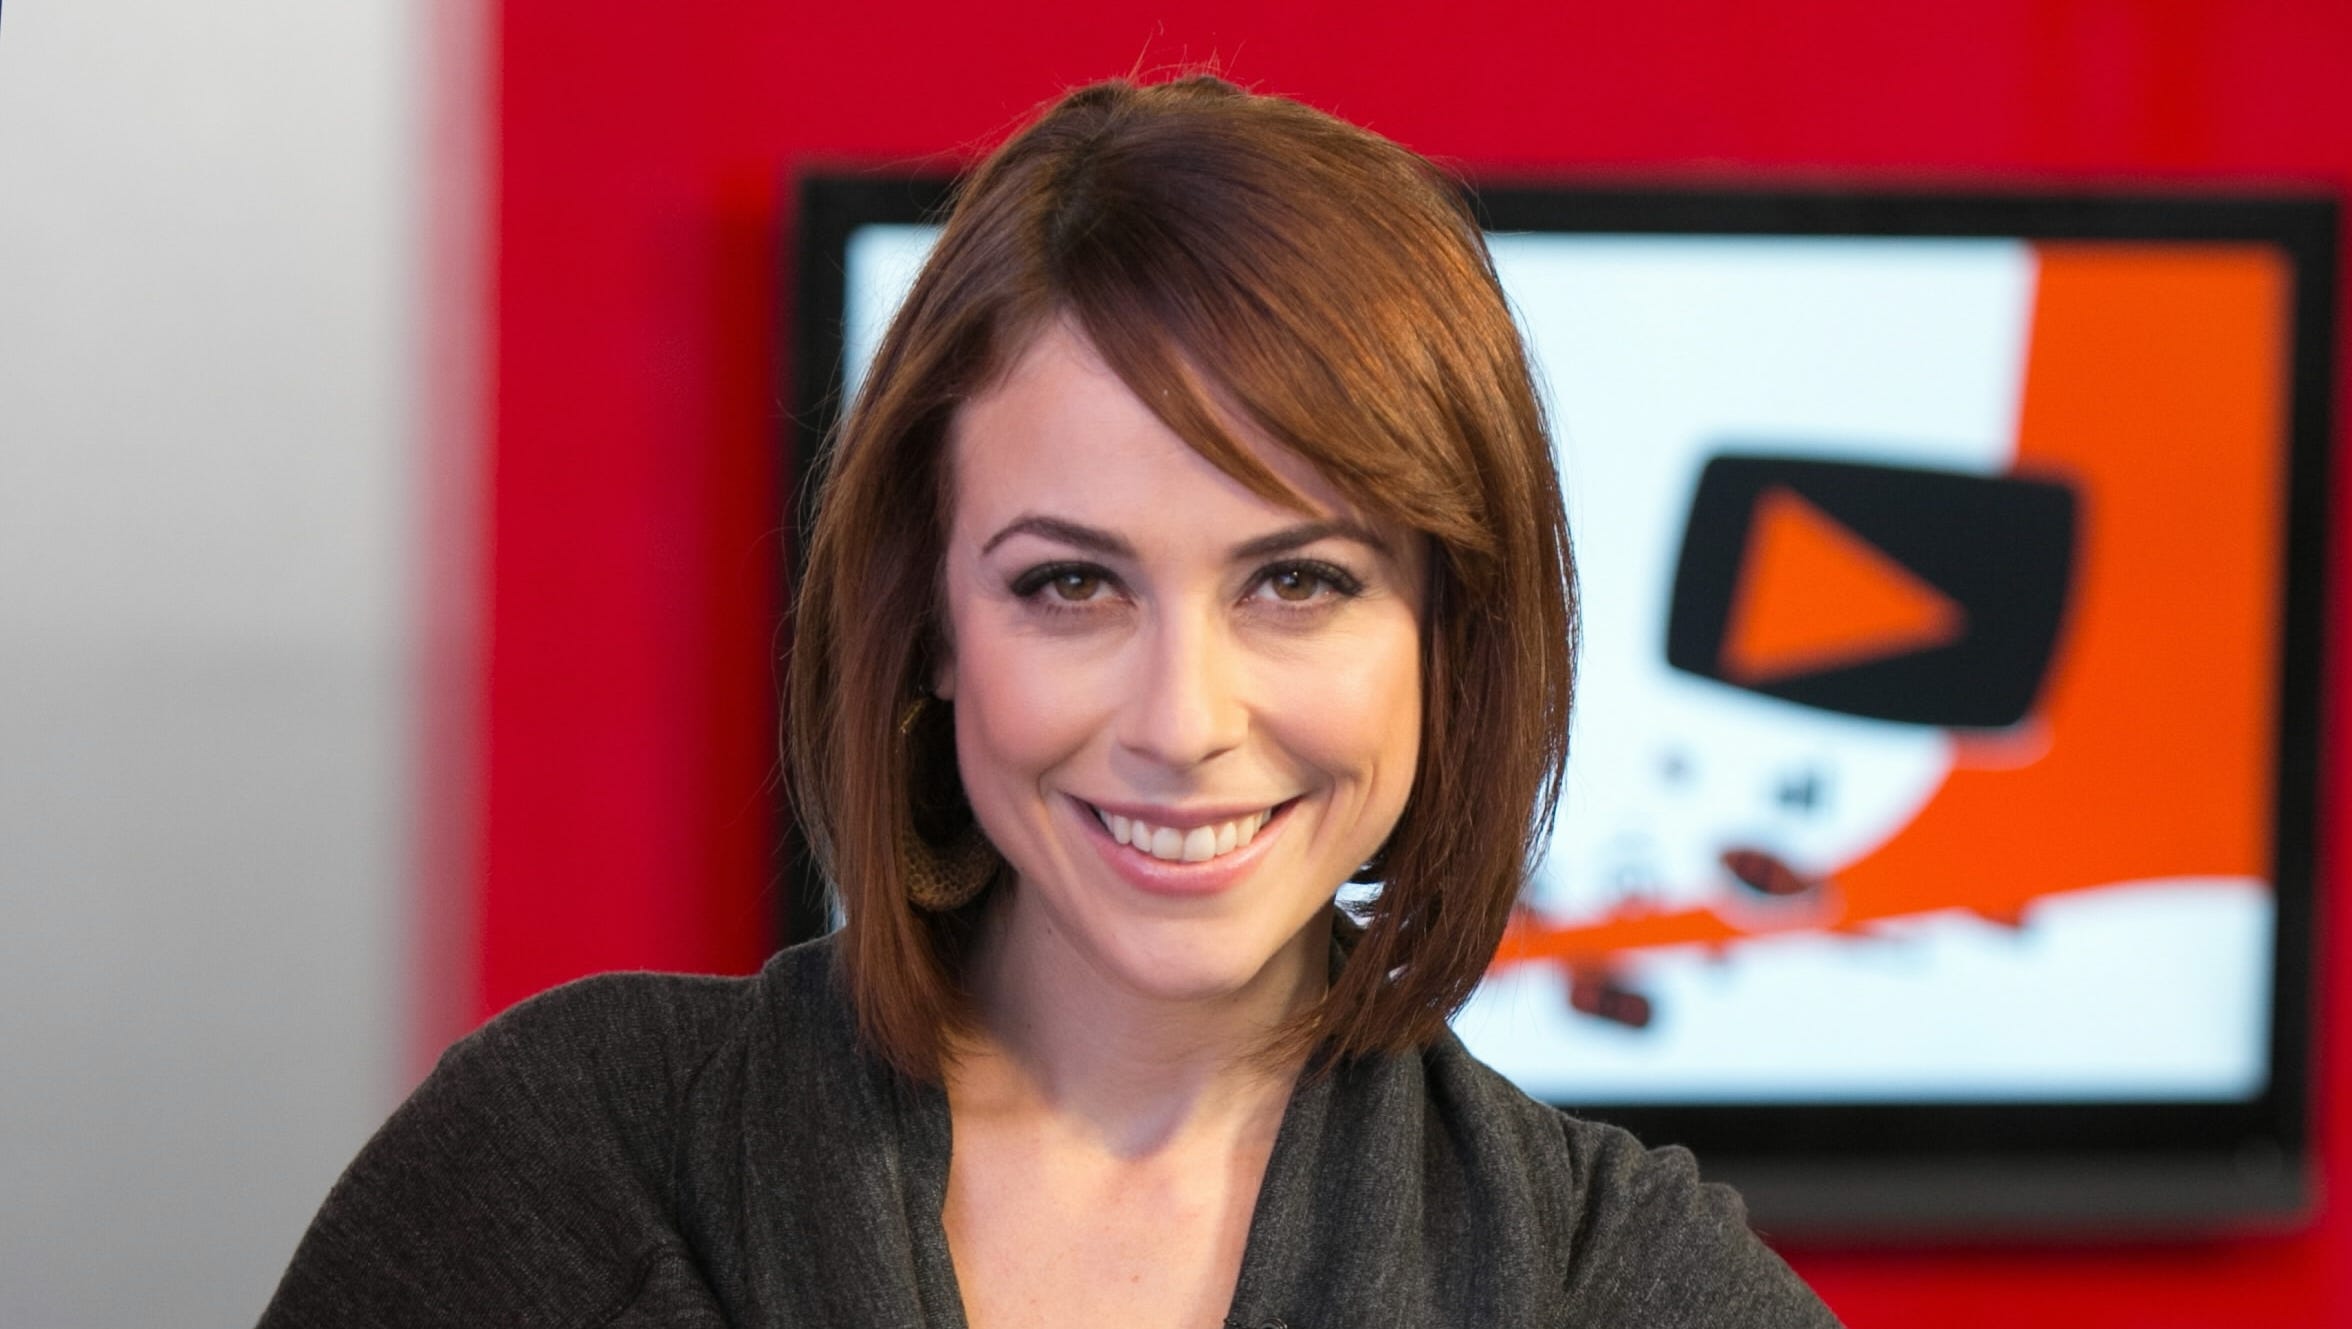 Talking Tech YouTube fuels growth for online host Shira Lazar.